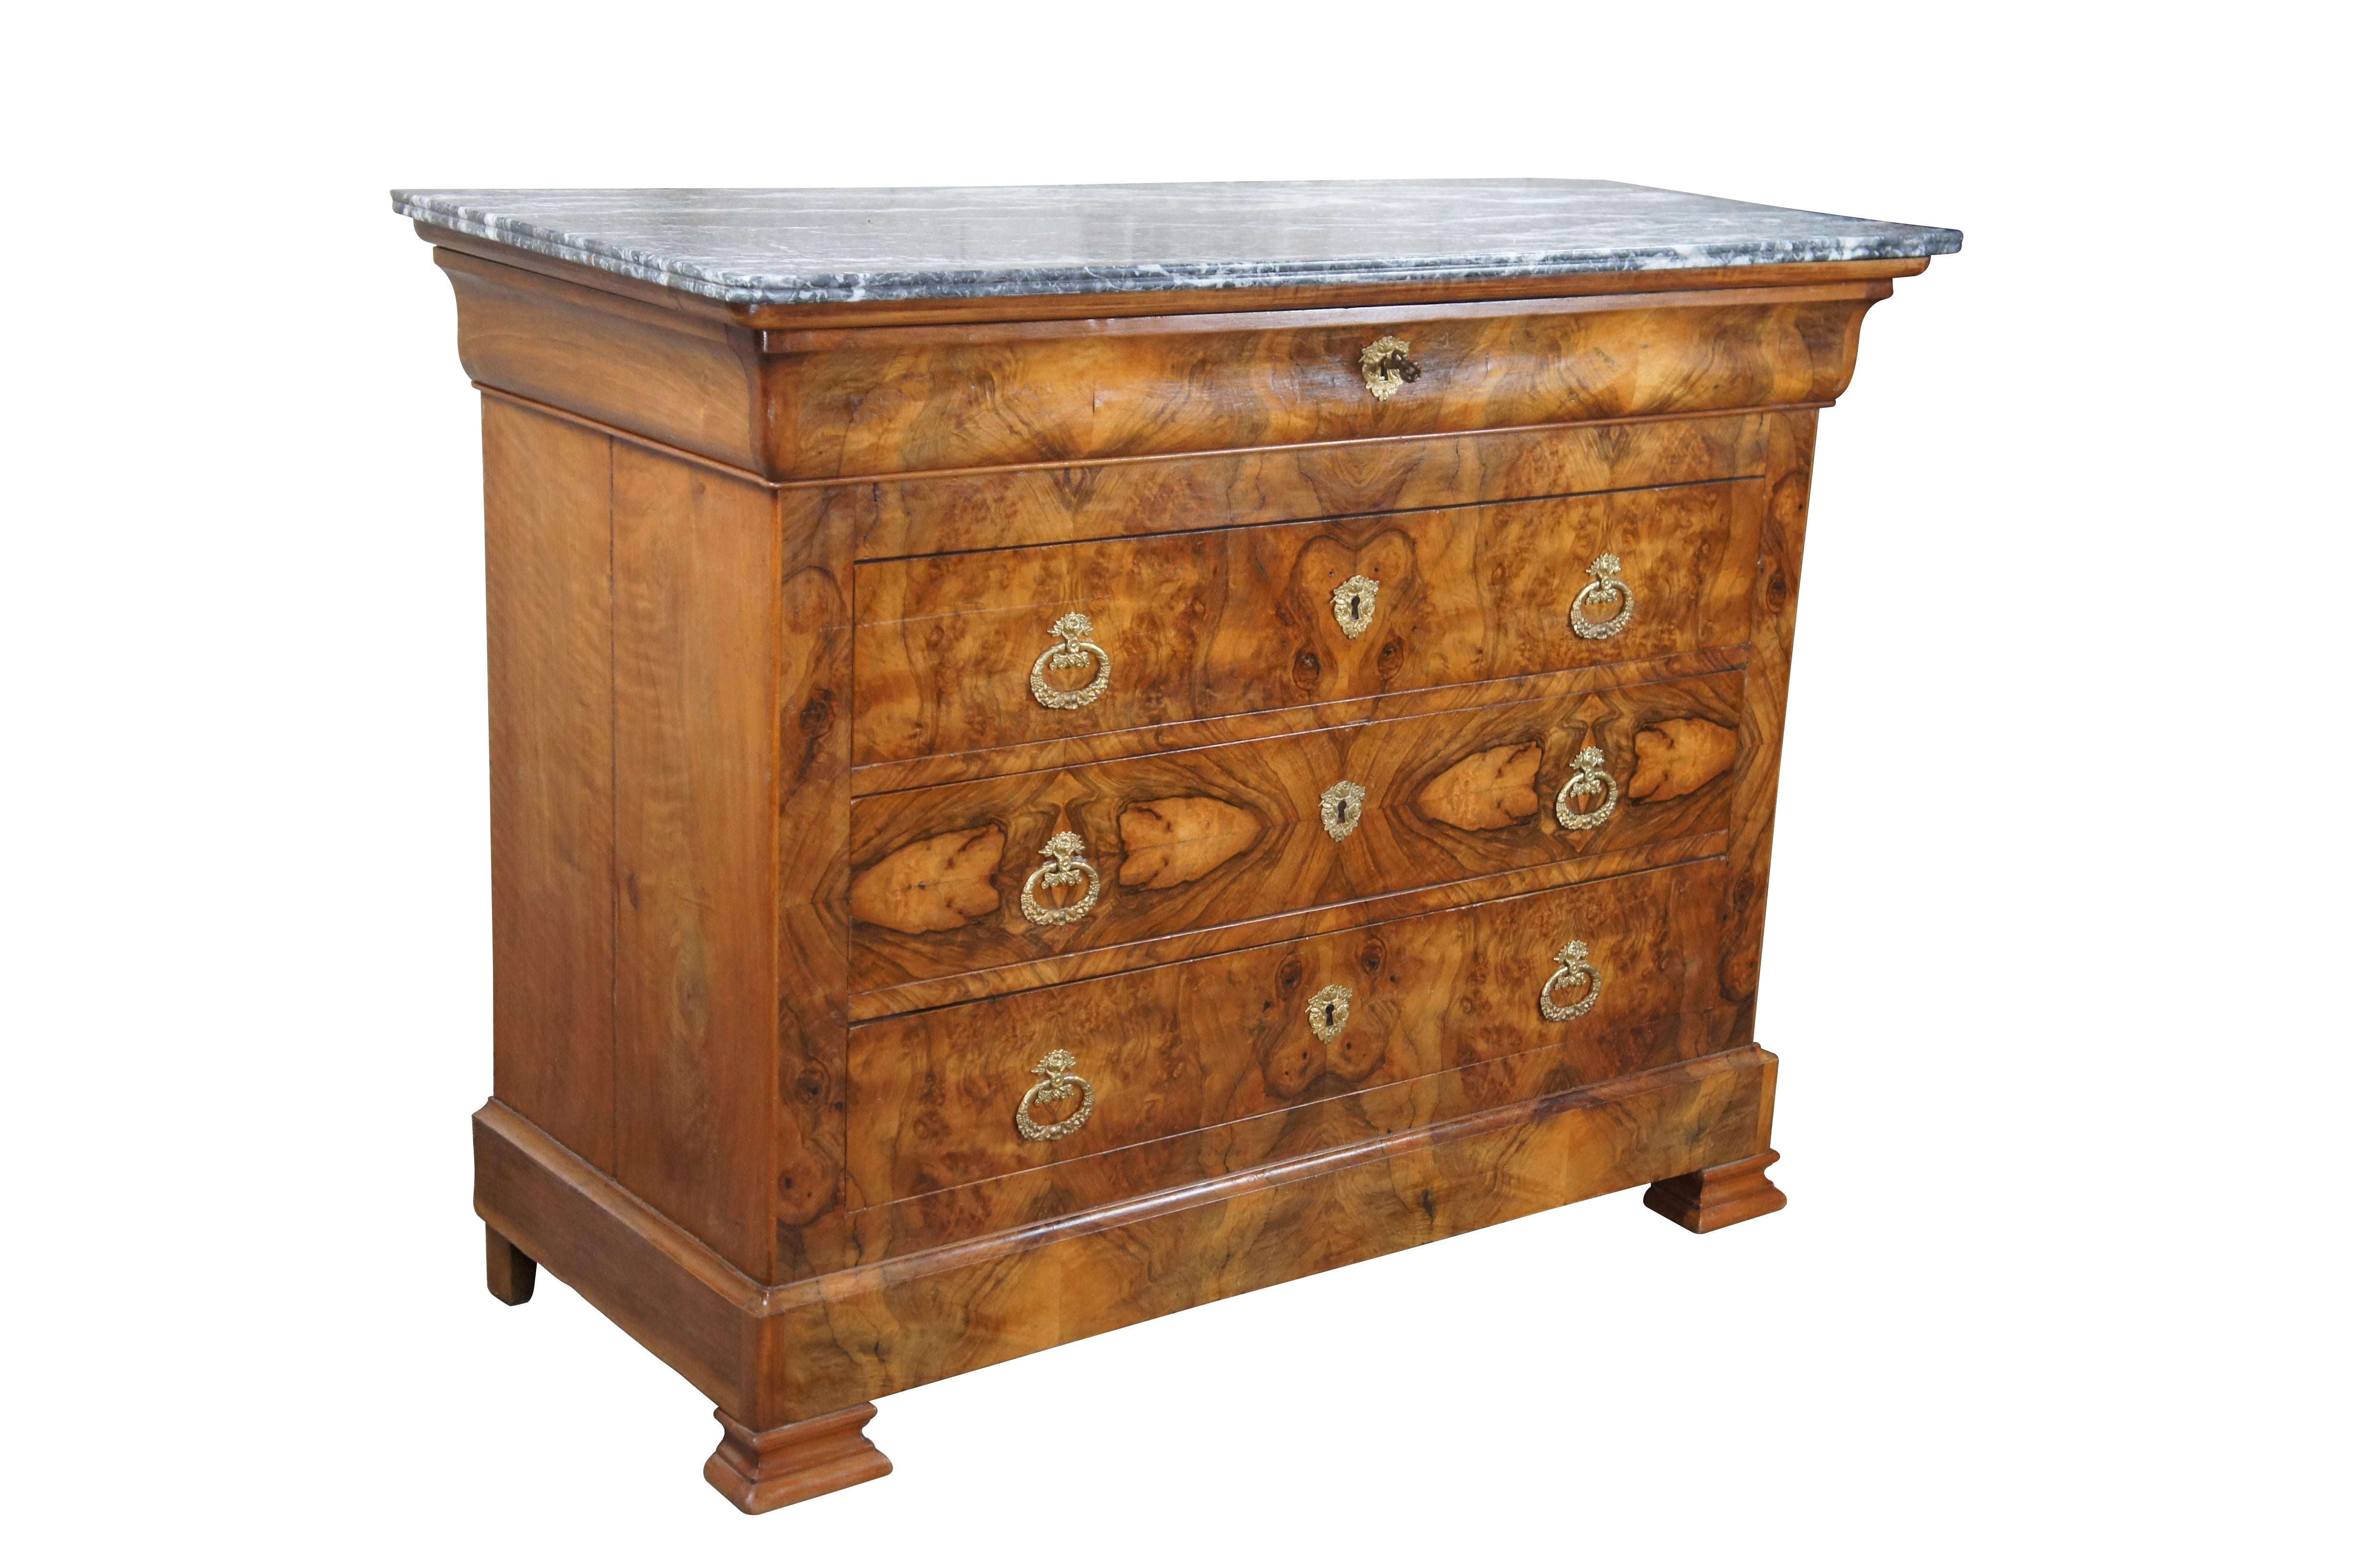 A Louis Philippe Walnut Commode, c. 1840.  Features a rectangular form made from walnut with matchbook veneer burled drawer fronts and Saint Anne Des Pyrenees Marble top.  Features an ogee-molded frieze drawer over three drawers with ornate gilt